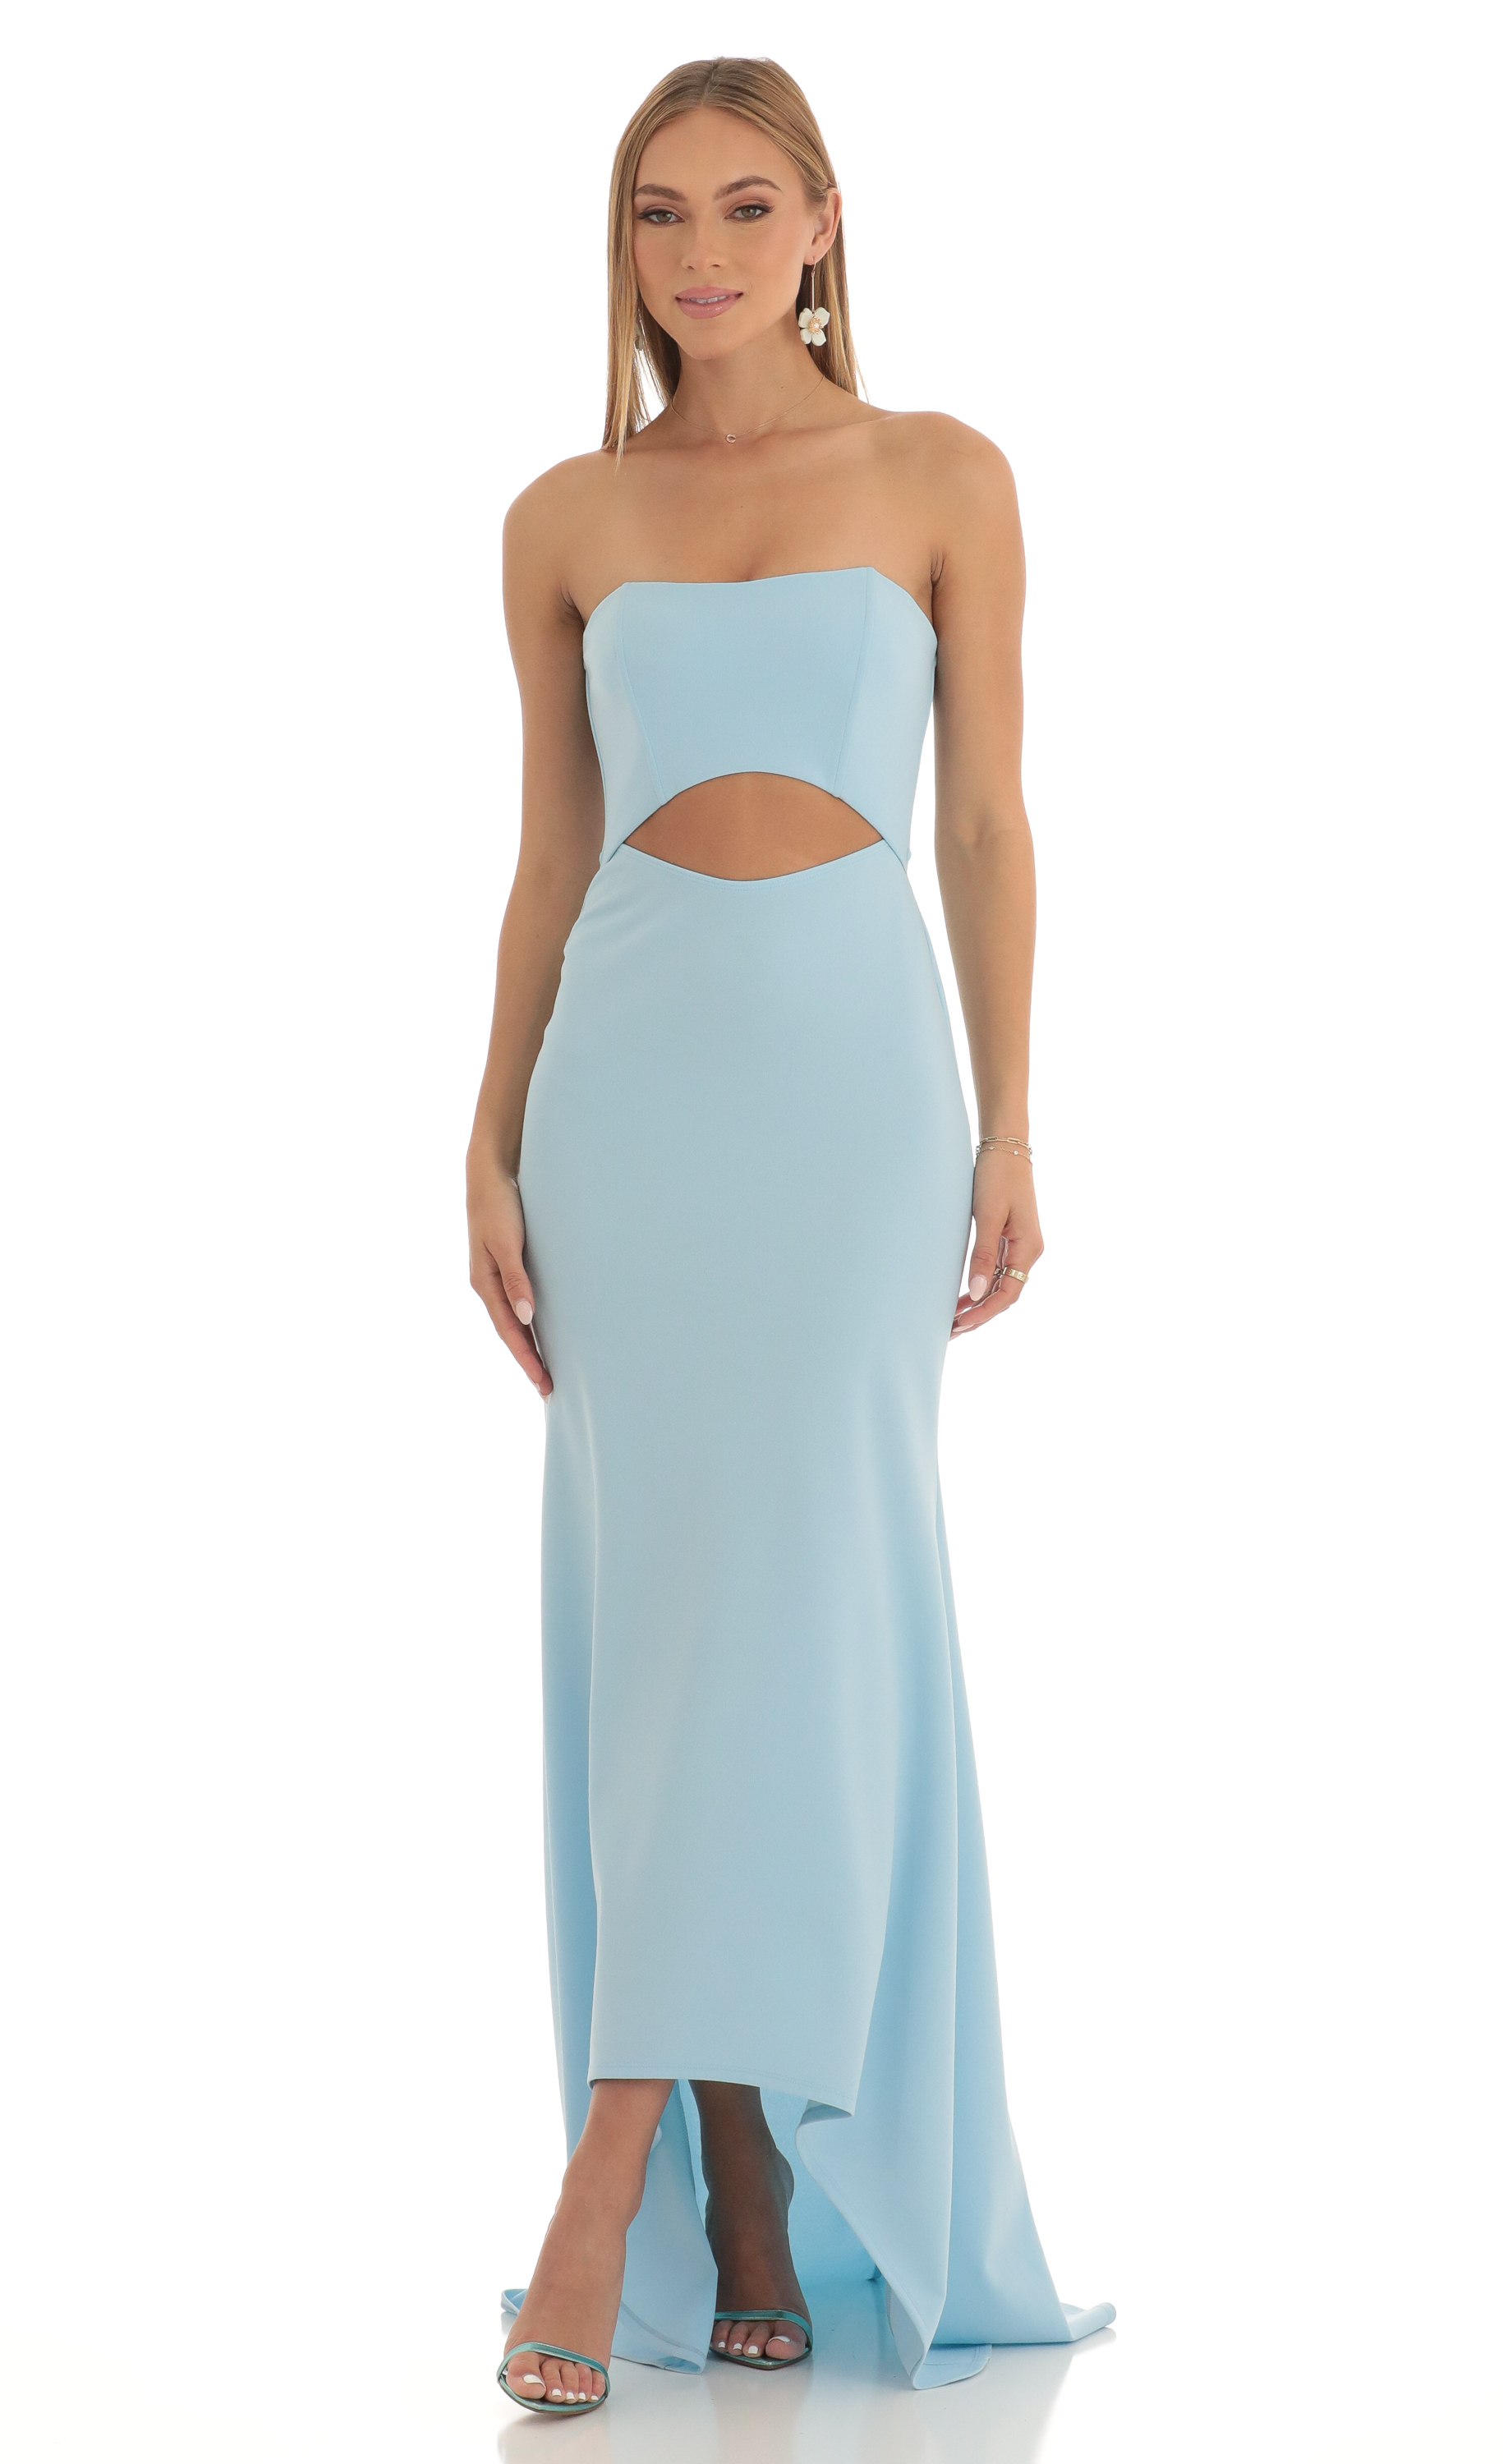 Moravia Crepe High Low Maxi Dress in Blue